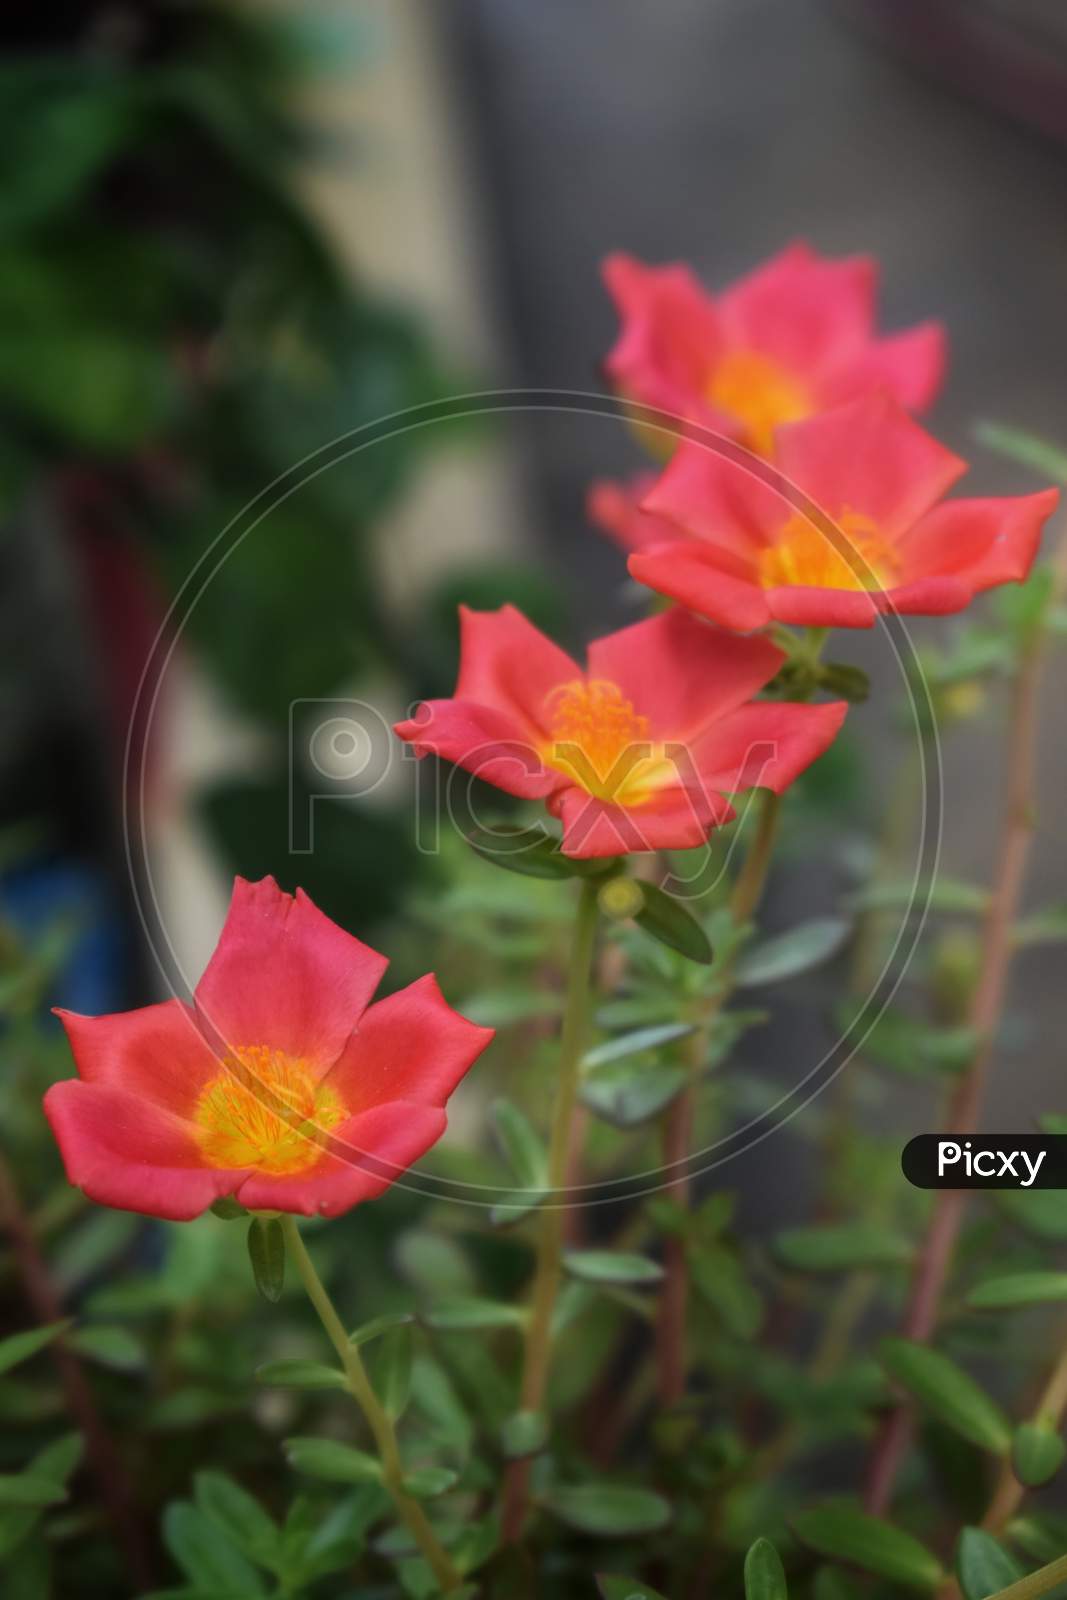 Salmon Color Portulaca Grandiflora Flower. Common Names This Flower: Eleven O'Clock, Mexican Rose,Grass Plant, Moss Rose, Sun Rose. Green Gray Background,India.